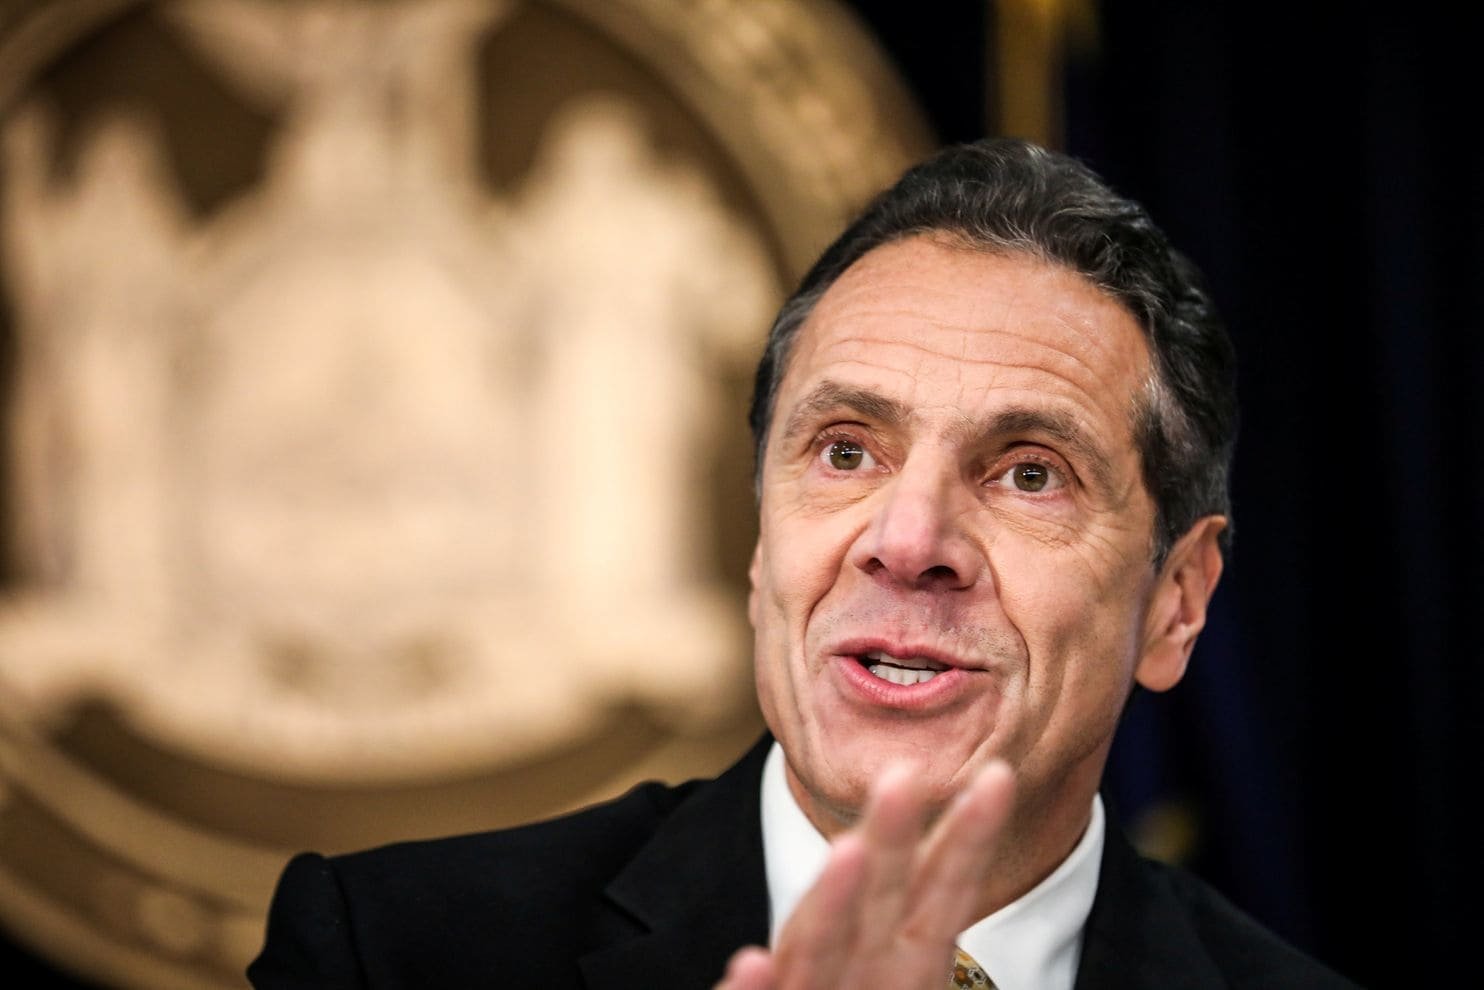 Legalizing marijuana is now one of Cuomo’s priorities. He’s been resisting it for years.